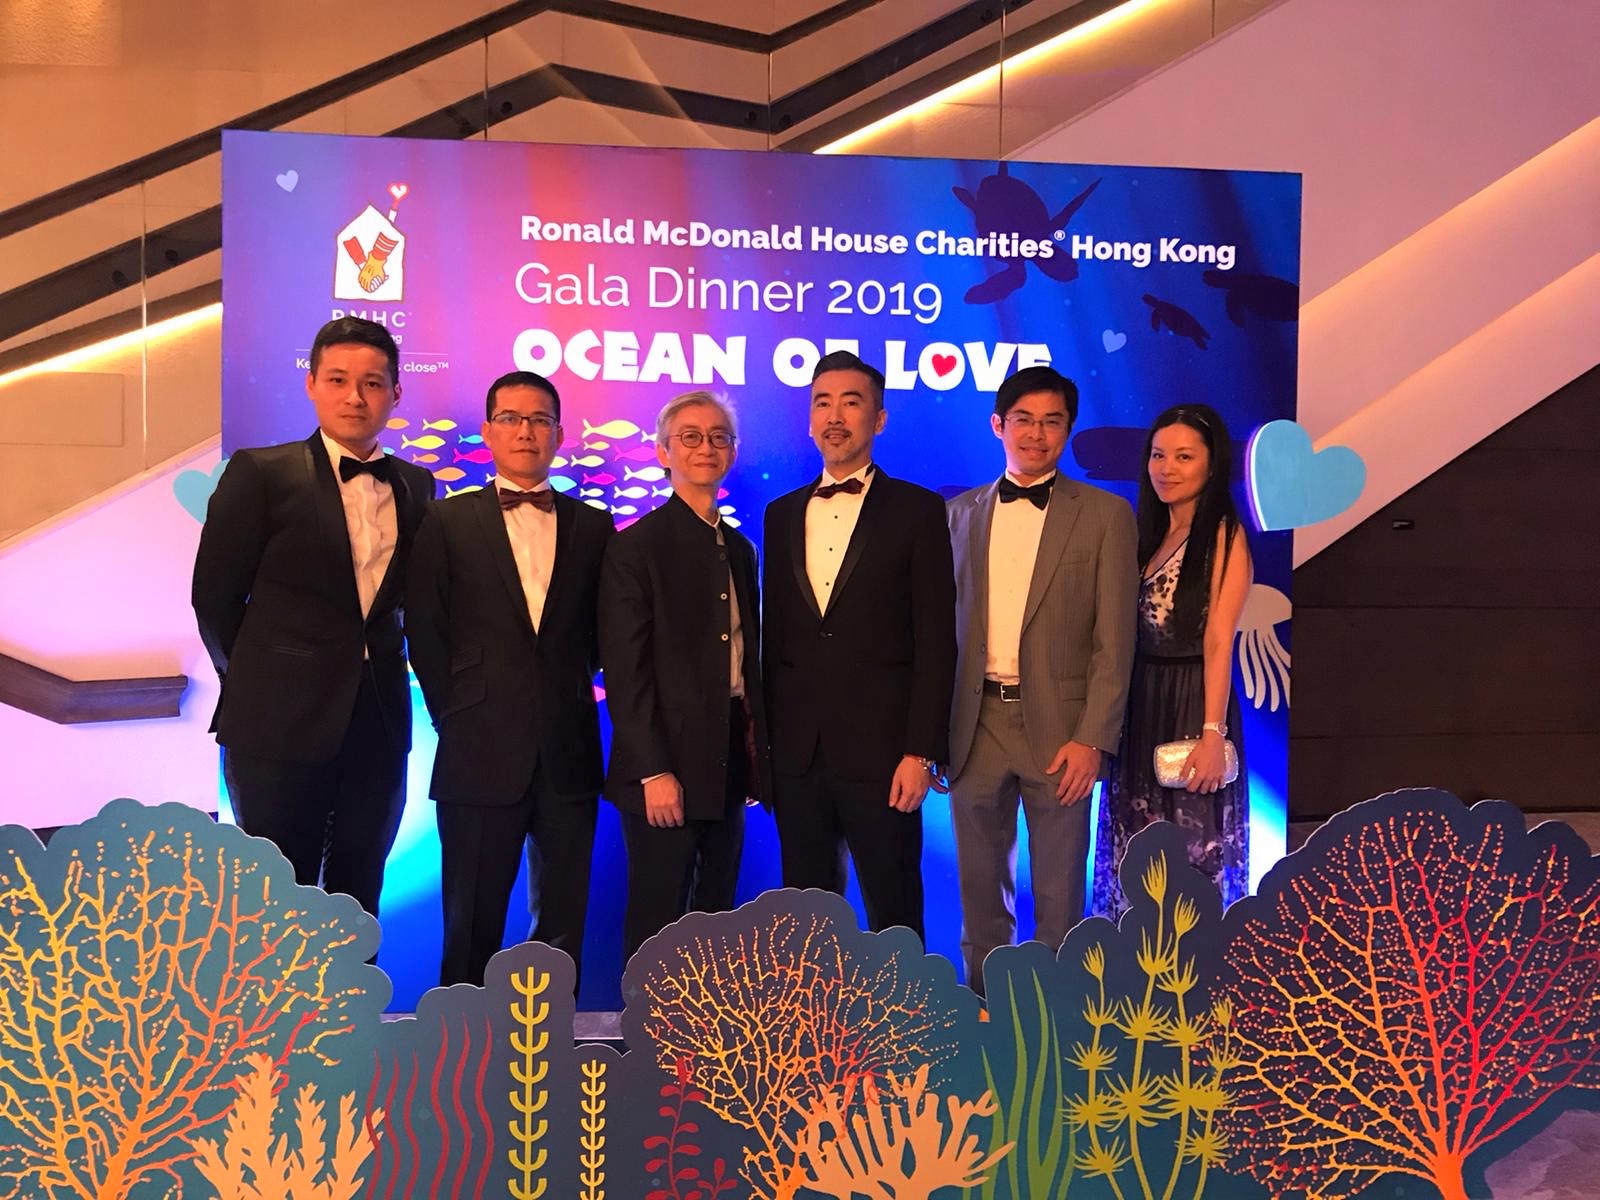 ONC Lawyers sponsored and attended the Ronald McDonald House Charities Gala Dinner 2019